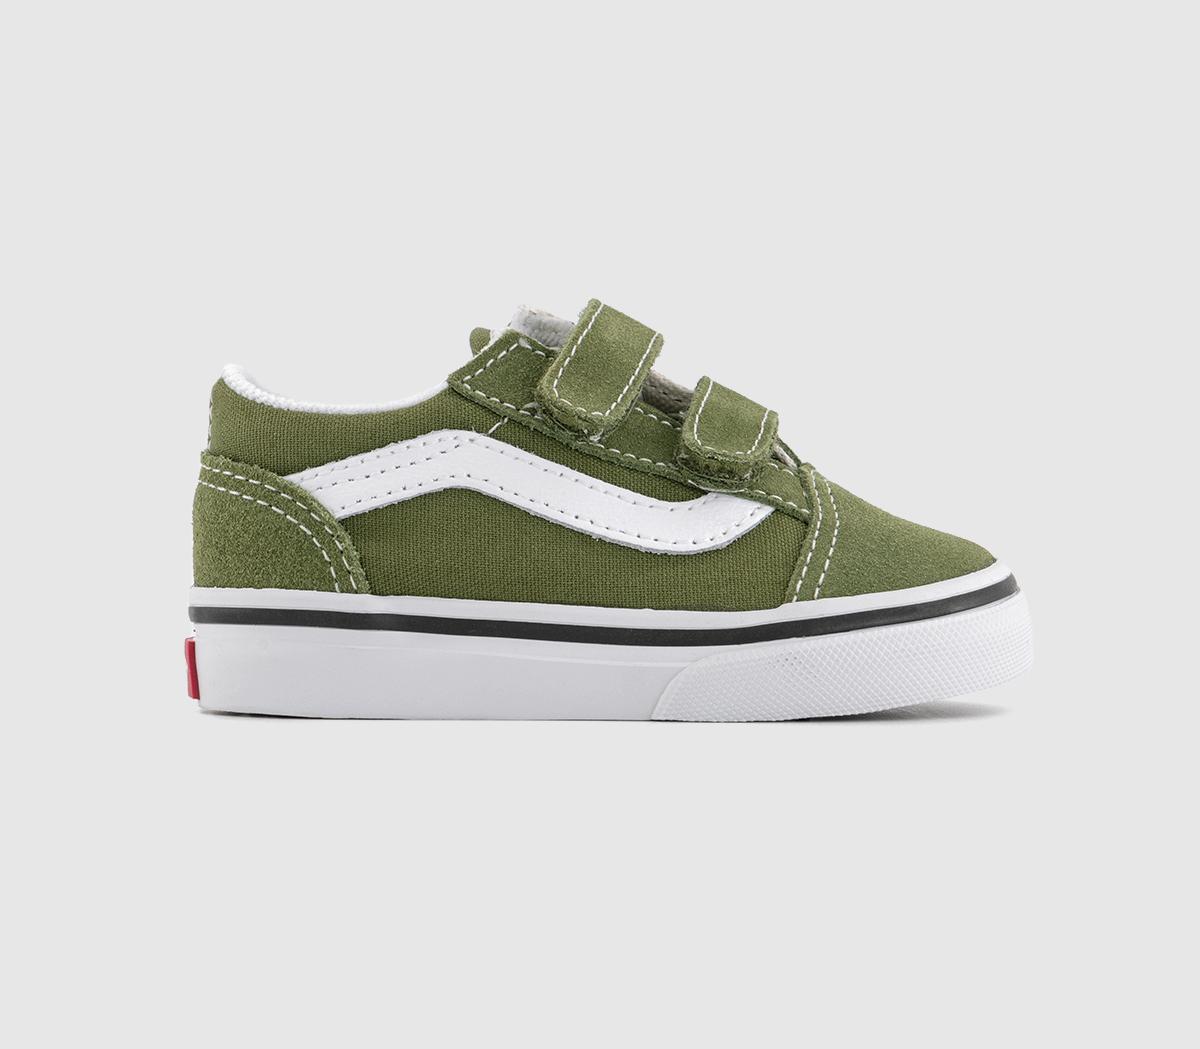 VansOld Skool Toddler TrainersColor Theory Pesto